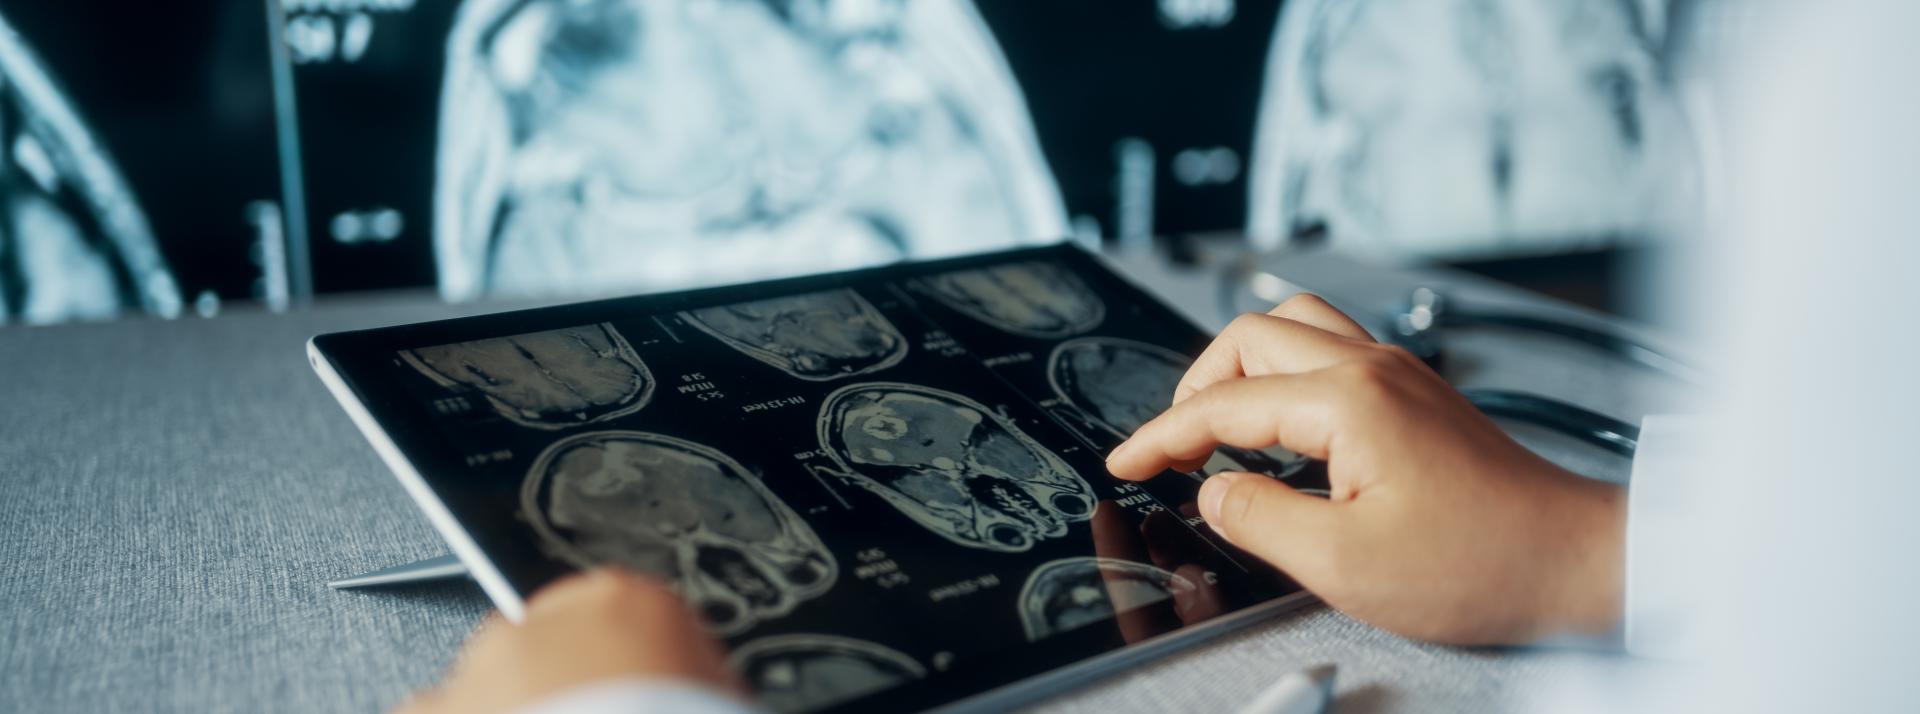 A doctor reviews an MRI on a tablet with other medical images in the background